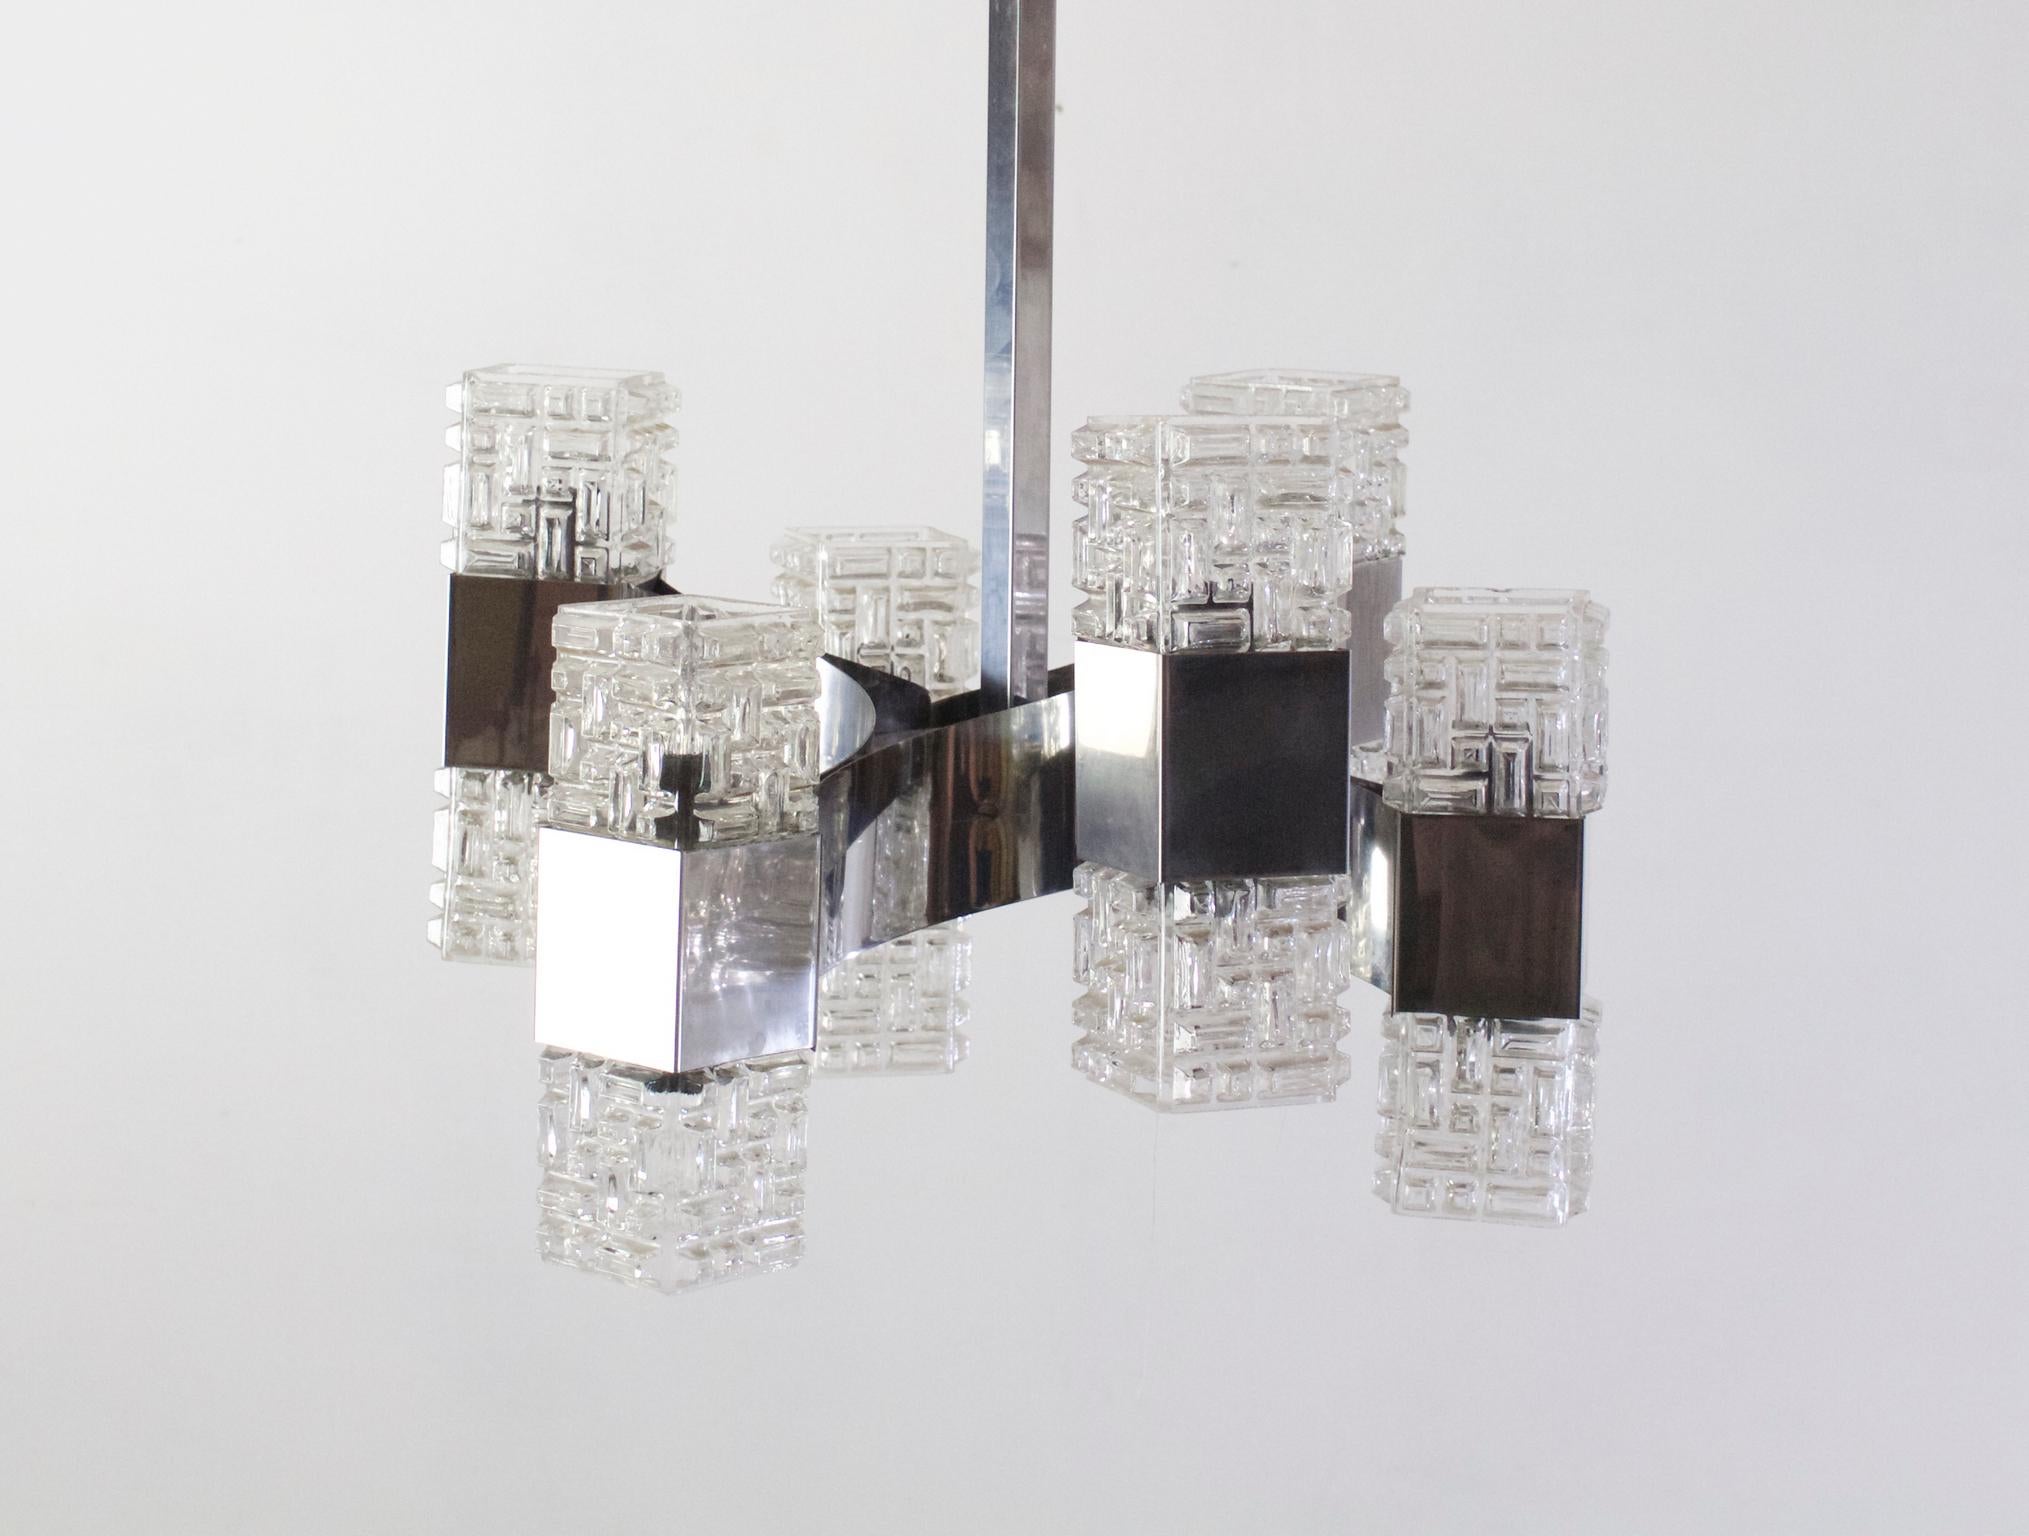 Chandelier by Gaetano Sciolari with six arms in chrome and glass. Uses twelve E14 lightbulbs.